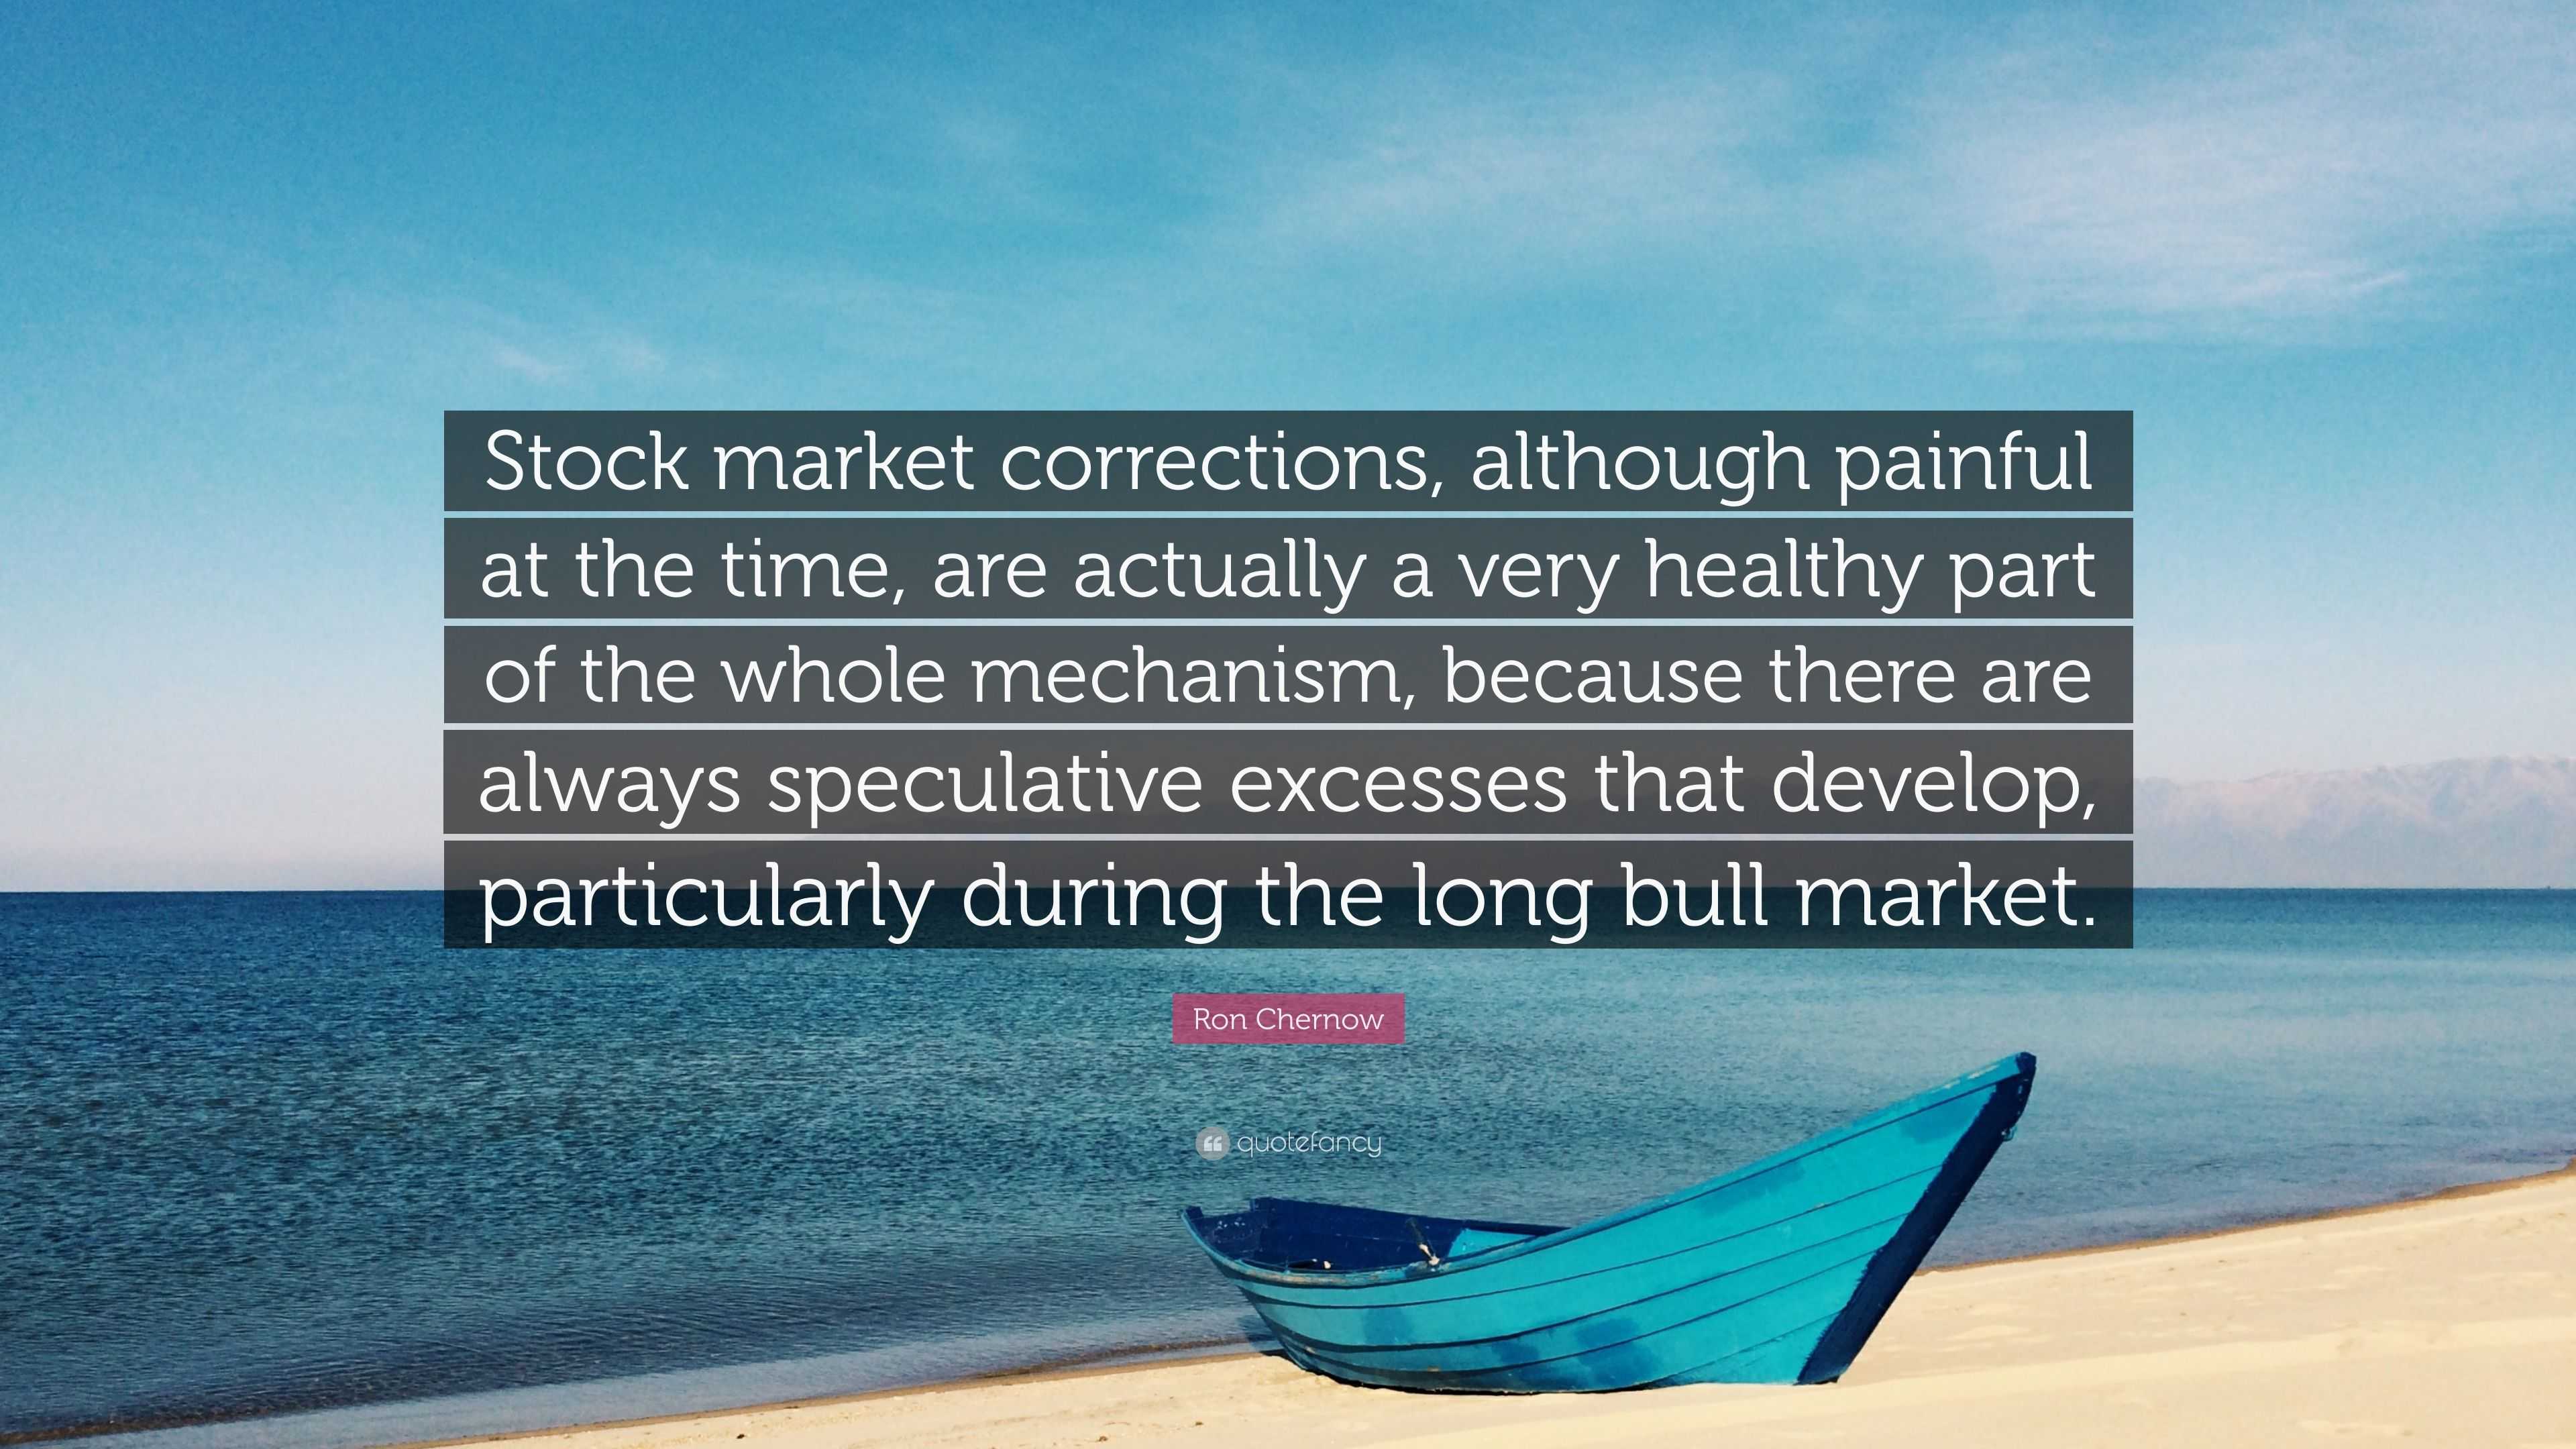 Is The Stock Market Correction Truly Over?